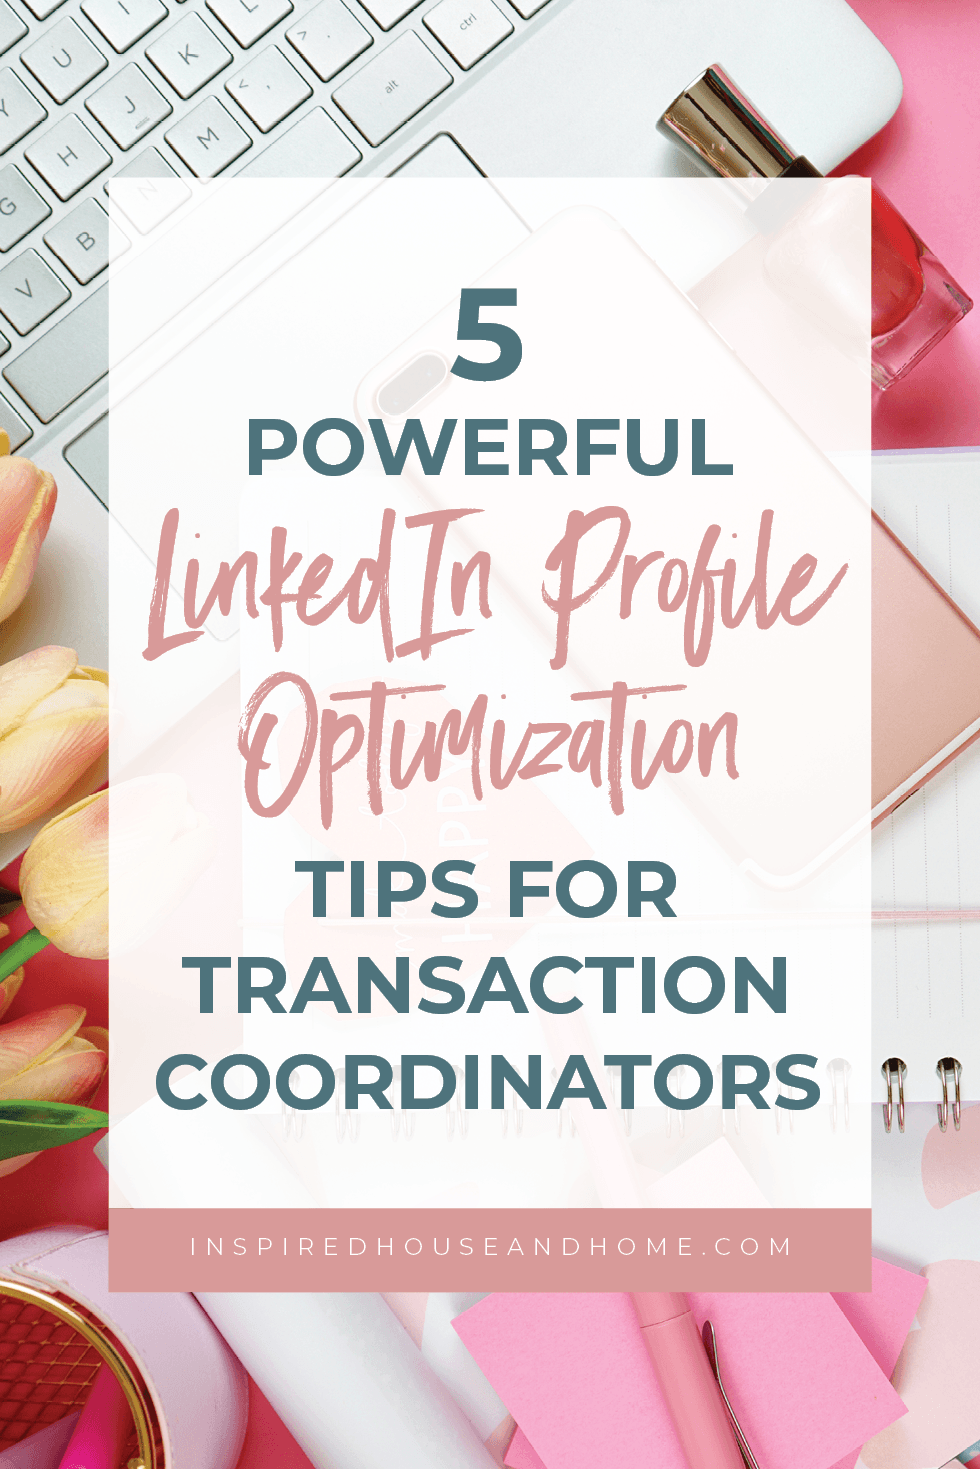 5 Powerful LinkedIn Profile Optimization Tips for Transaction Coordinators | Inspired House and Home